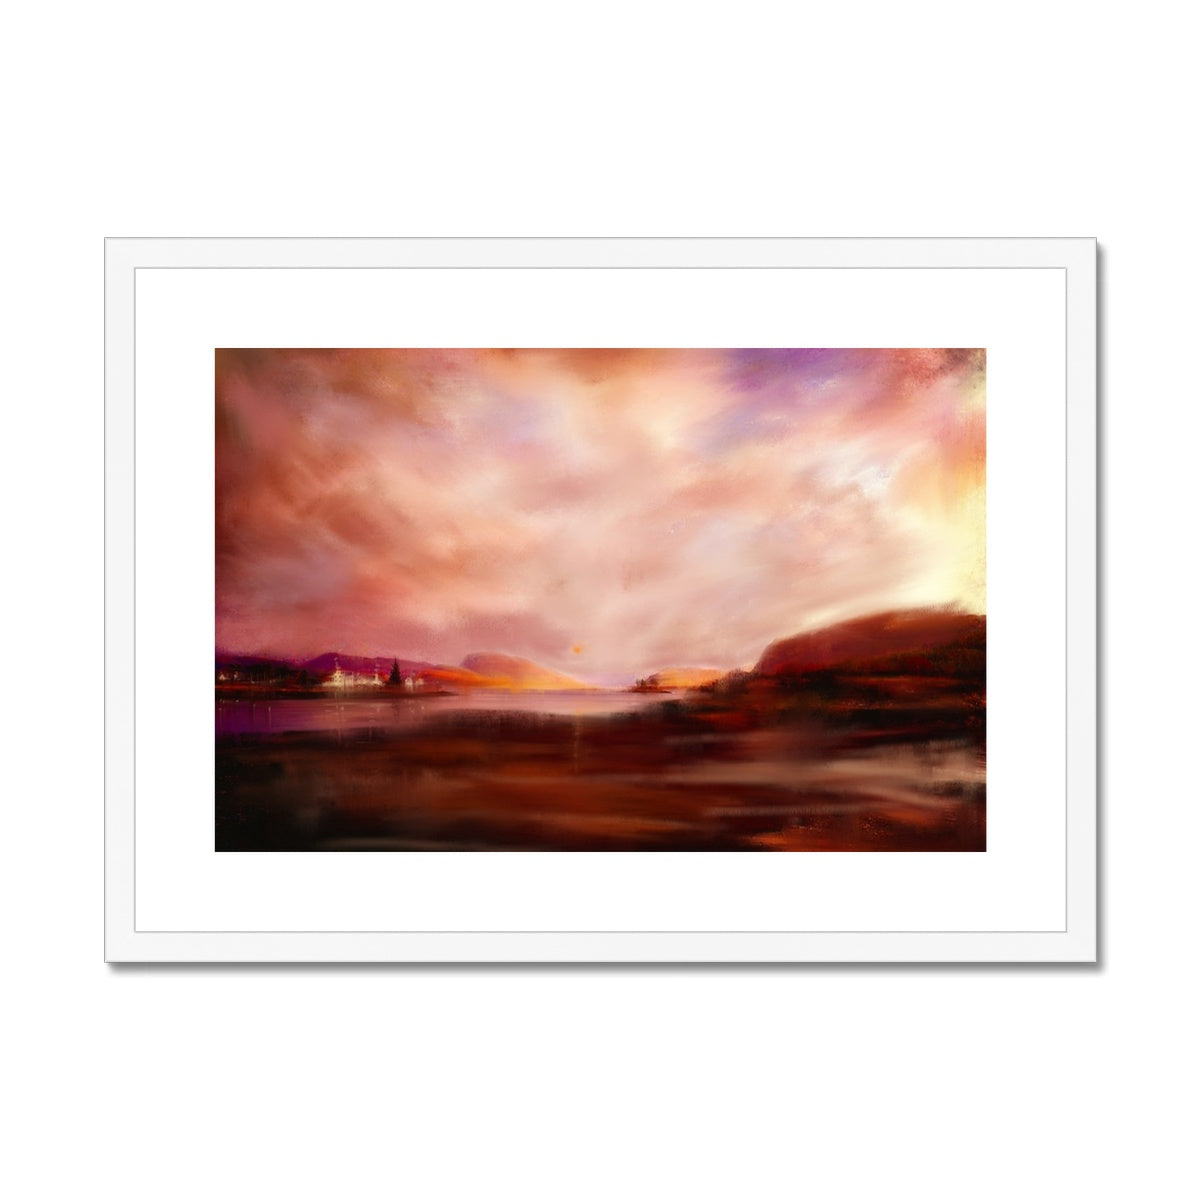 Plockton Sunset Painting | Framed & Mounted Prints From Scotland-Framed & Mounted Prints-Scottish Highlands & Lowlands Art Gallery-A2 Landscape-White Frame-Paintings, Prints, Homeware, Art Gifts From Scotland By Scottish Artist Kevin Hunter